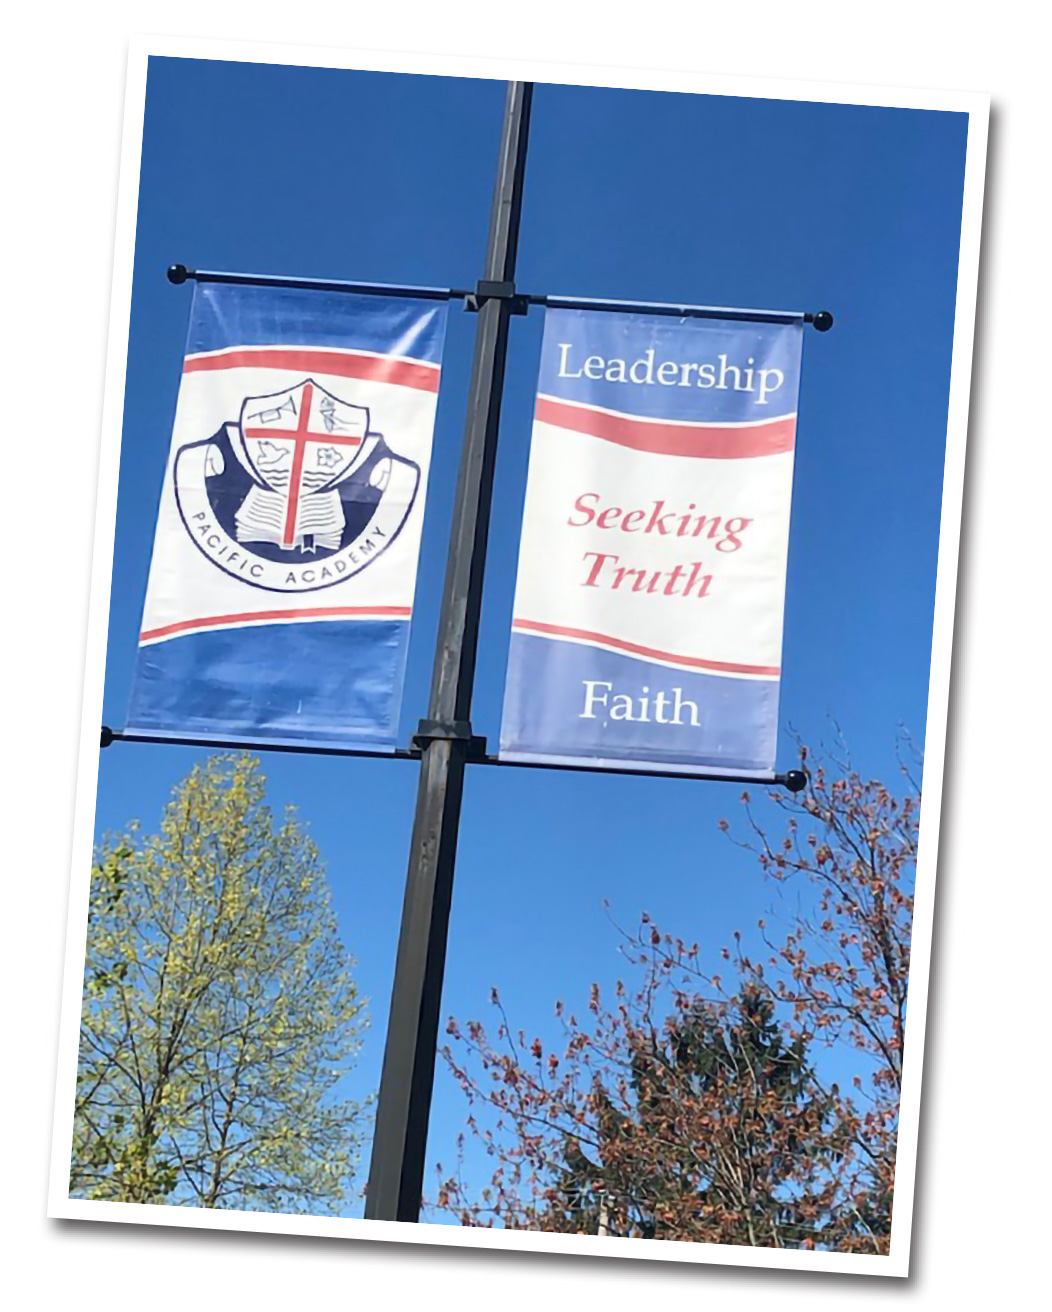 Double Banner with school logo on left and text "Leadership, Seeking Truth, Faith" on right.